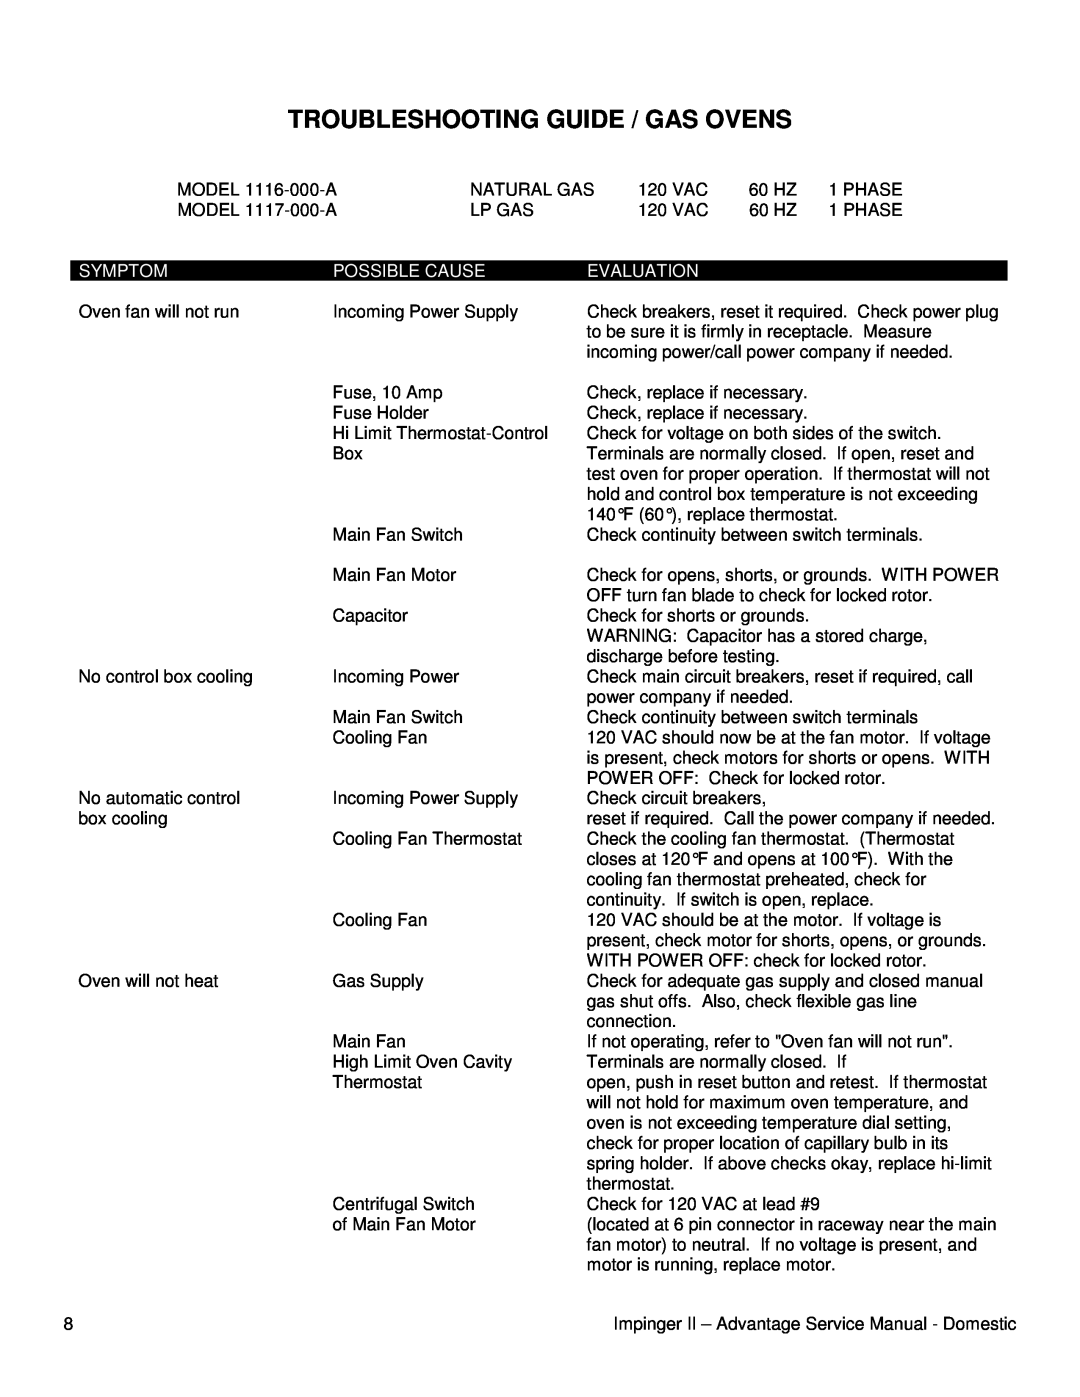 Lincoln 1100ADVSVC, 1117-000-A service manual Troubleshooting Guide / Gas Ovens, Symptom, Possible Cause, Evaluation 